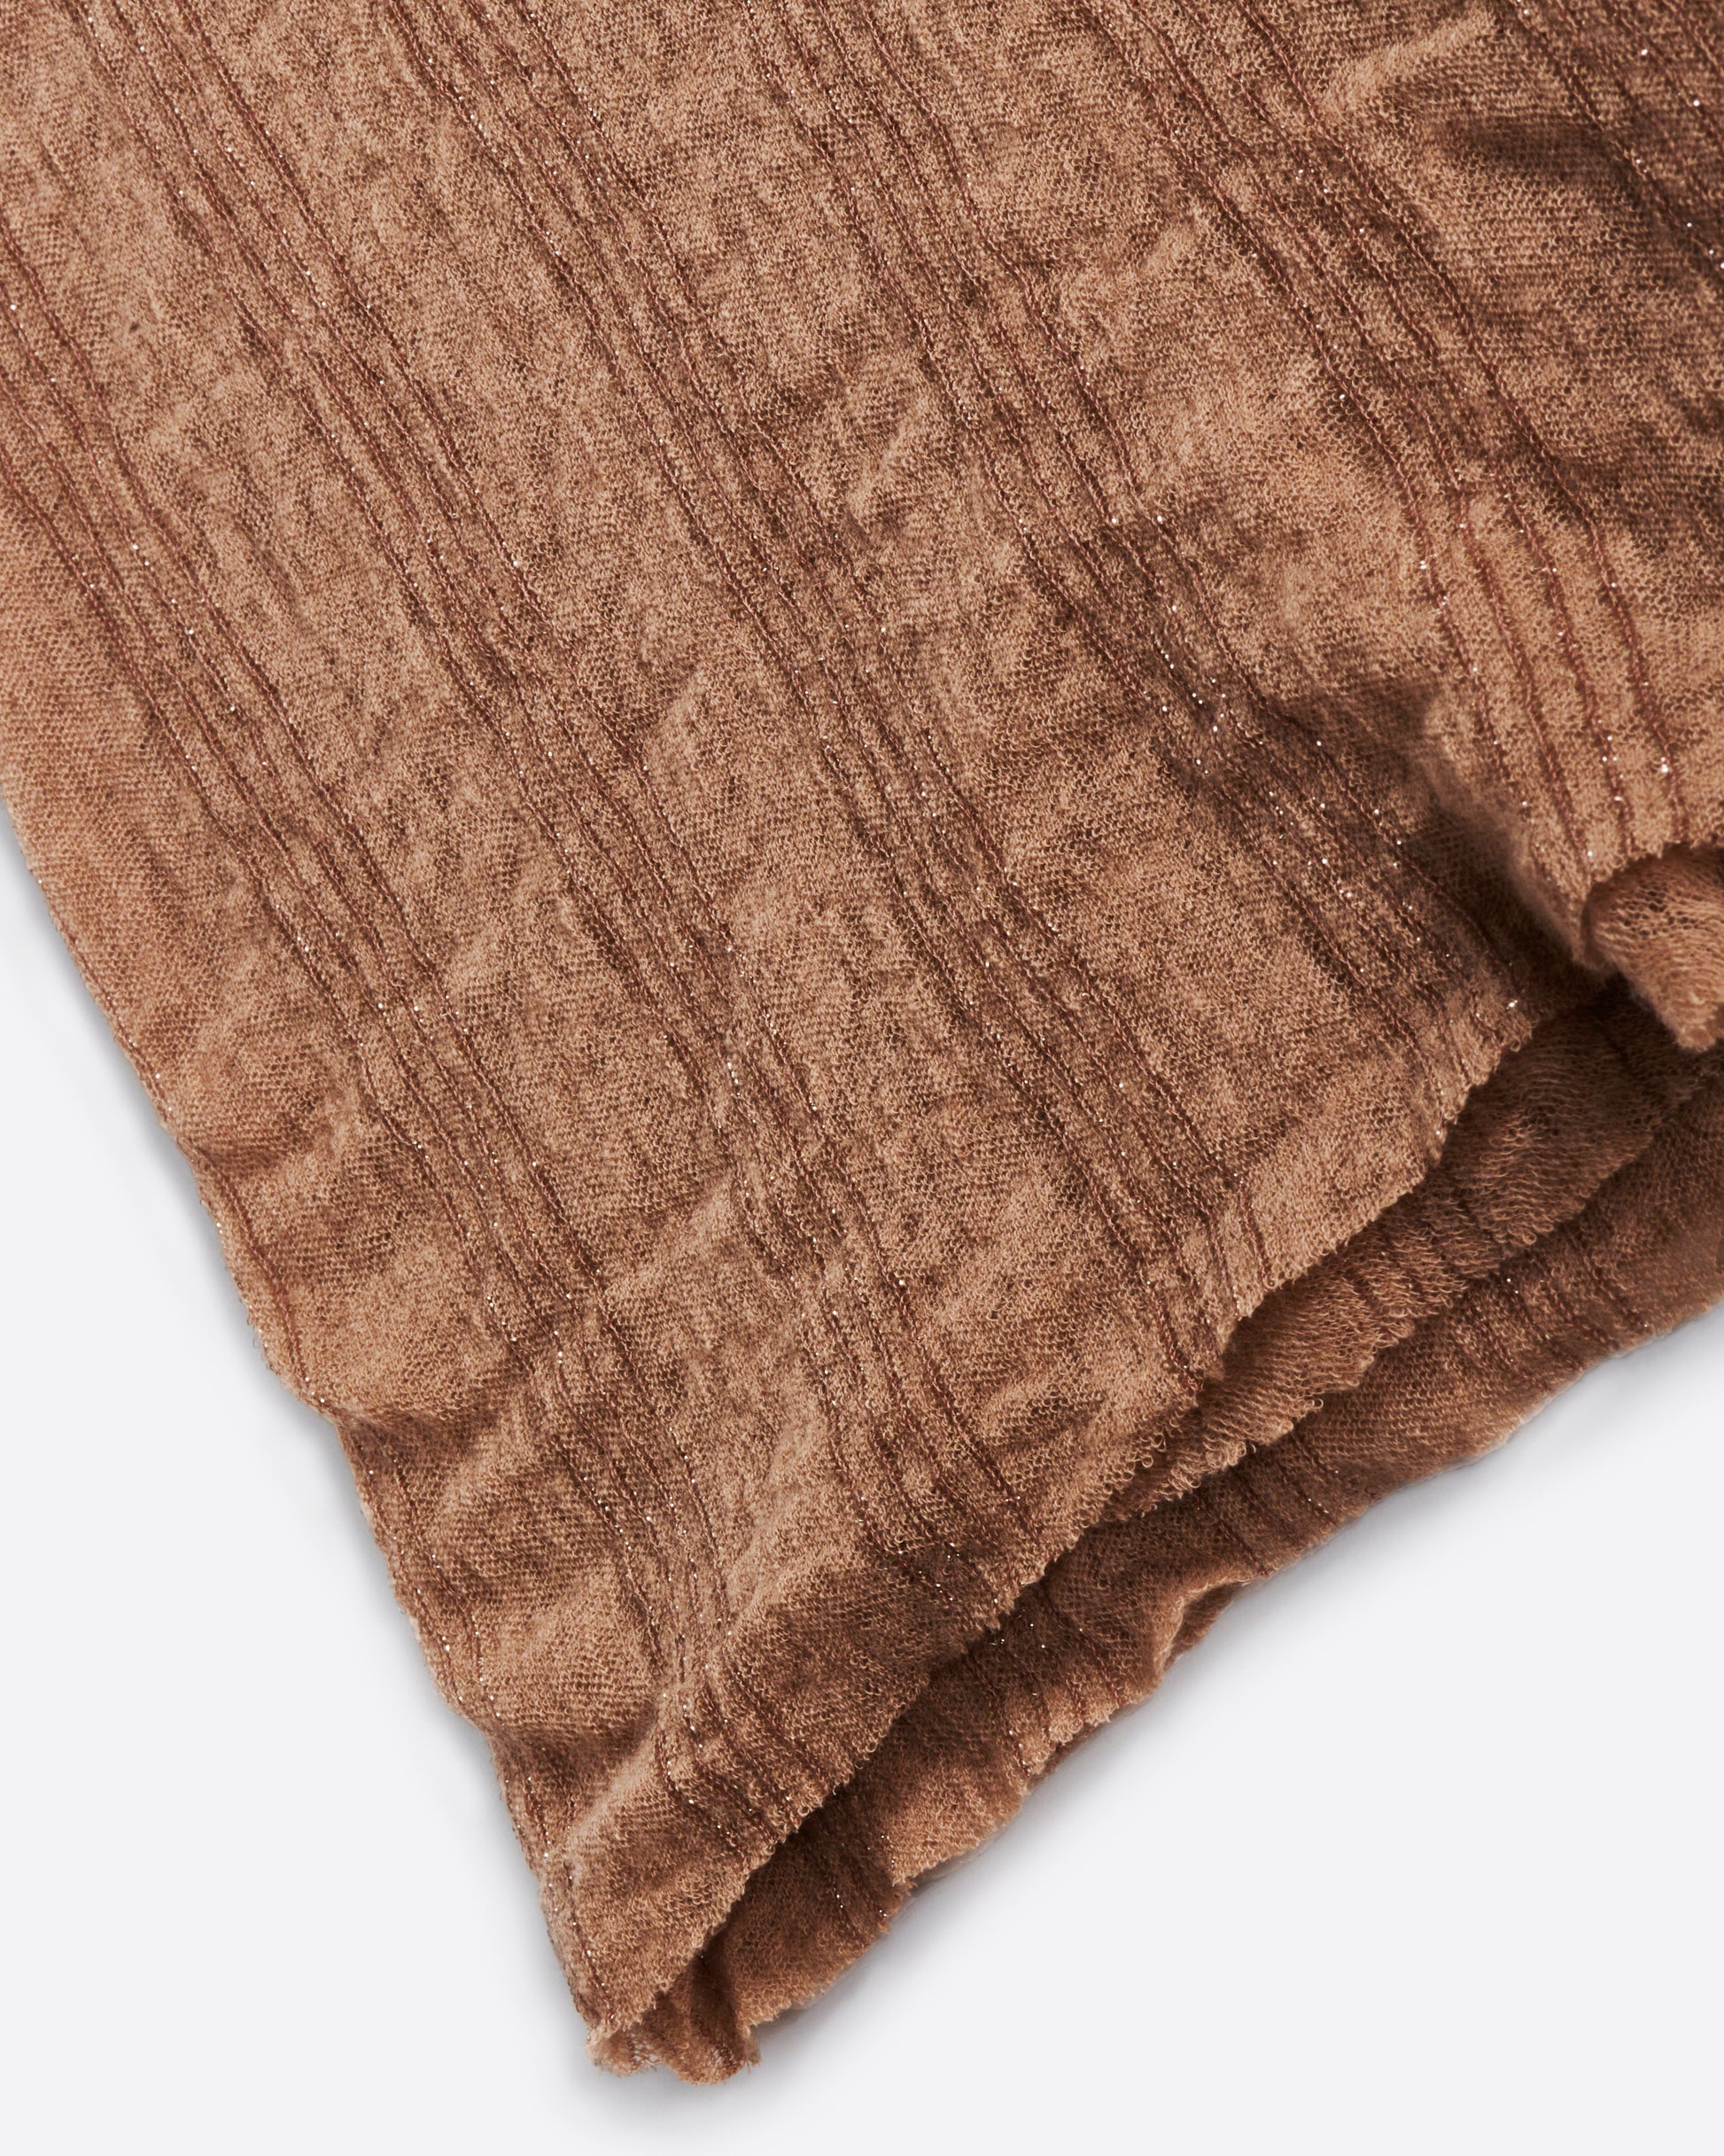 A cashmere, mocha-colored scarf with sparkly lurex stripes.